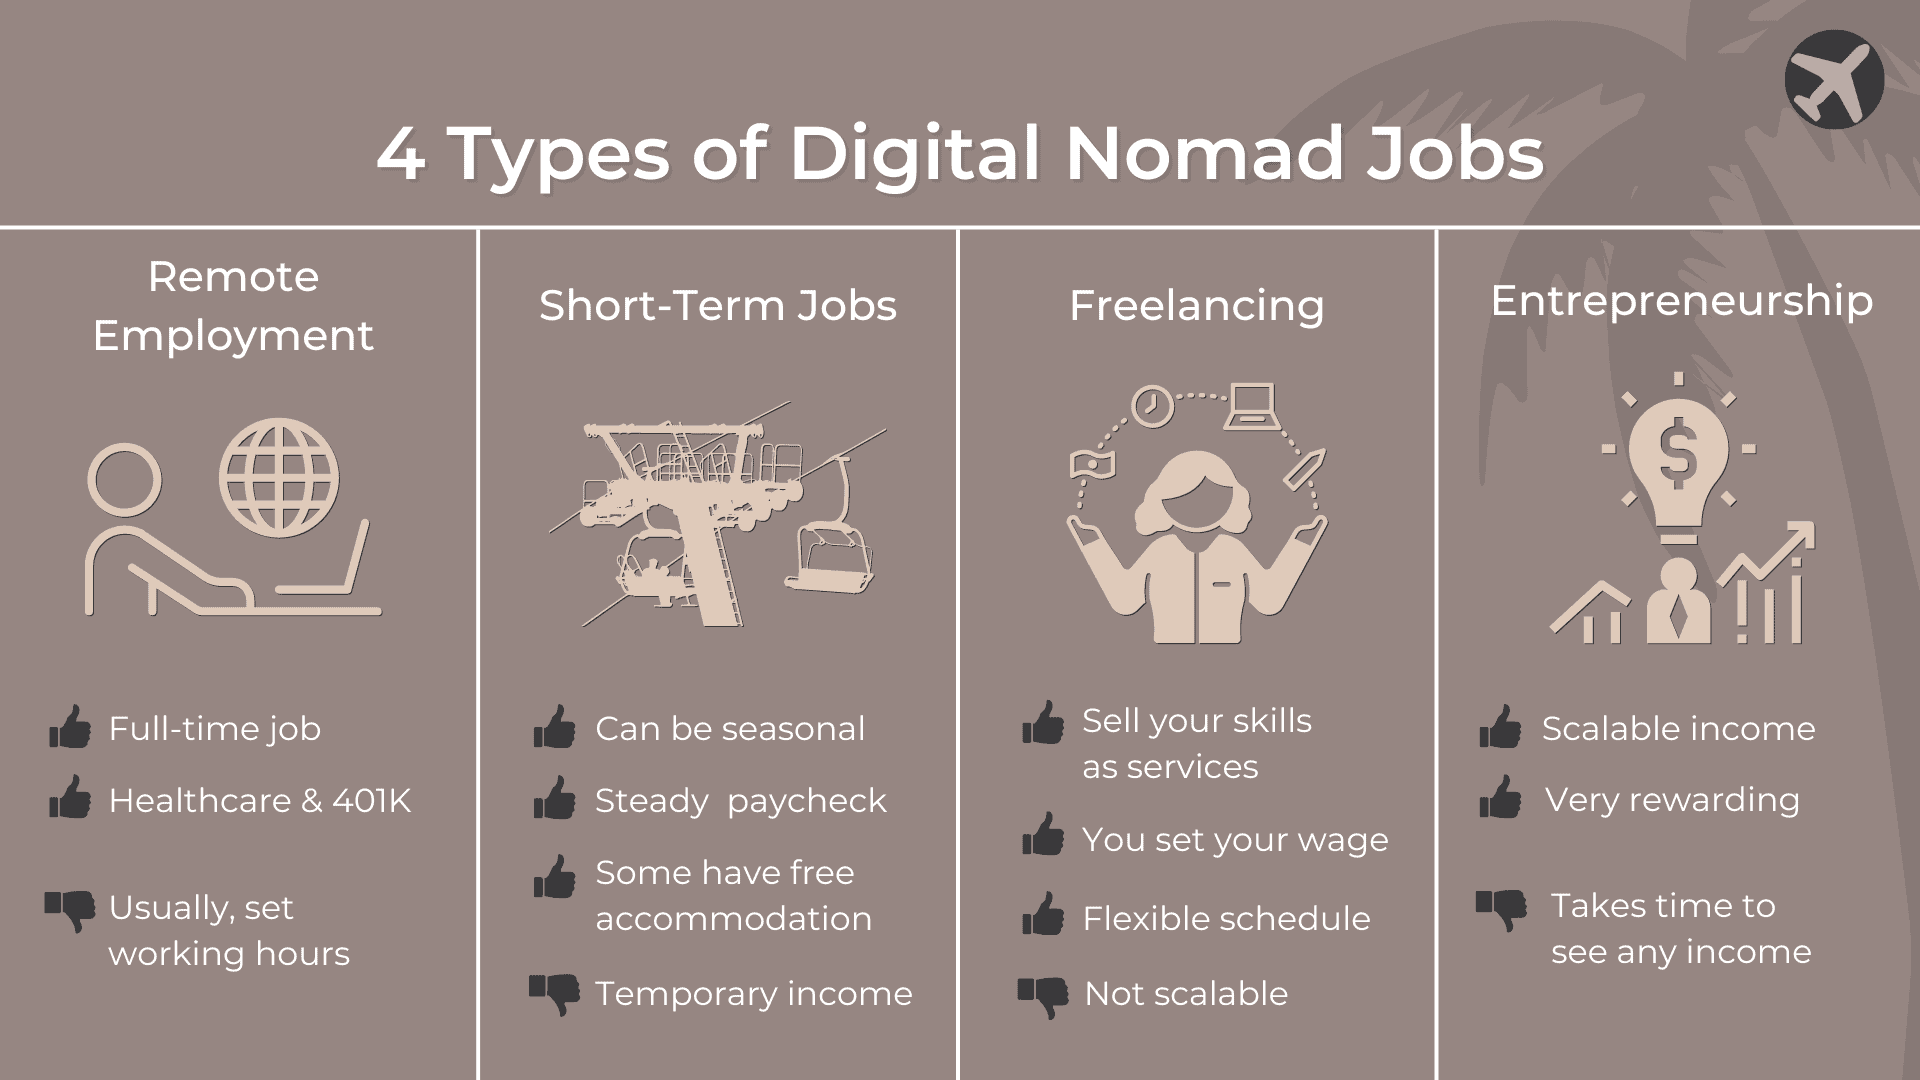 Original graphic showing columns for the 4 types of digital nomad jobs: remote employment, short-term jobs, freelancing, and entrepreneurship.